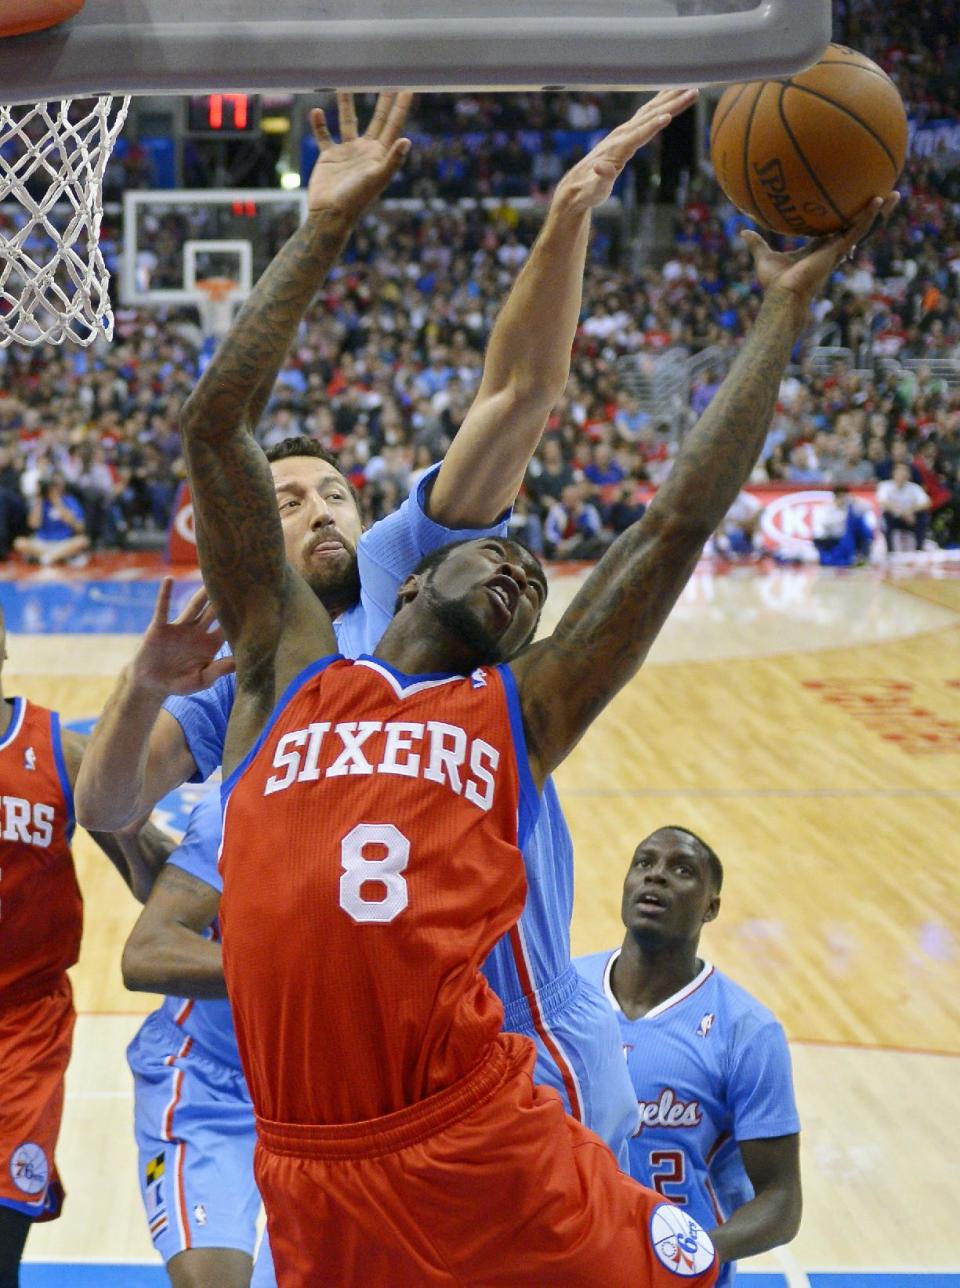 Philadelphia 76ers guard Tony Wroten, right, puts up a shot as Los Angeles Clippers forward Hedo Turkoglu, of Turkey, defends during the first half of an NBA basketball game, Sunday, Feb. 9, 2014, in Los Angeles. (AP Photo/Mark J. Terrill)